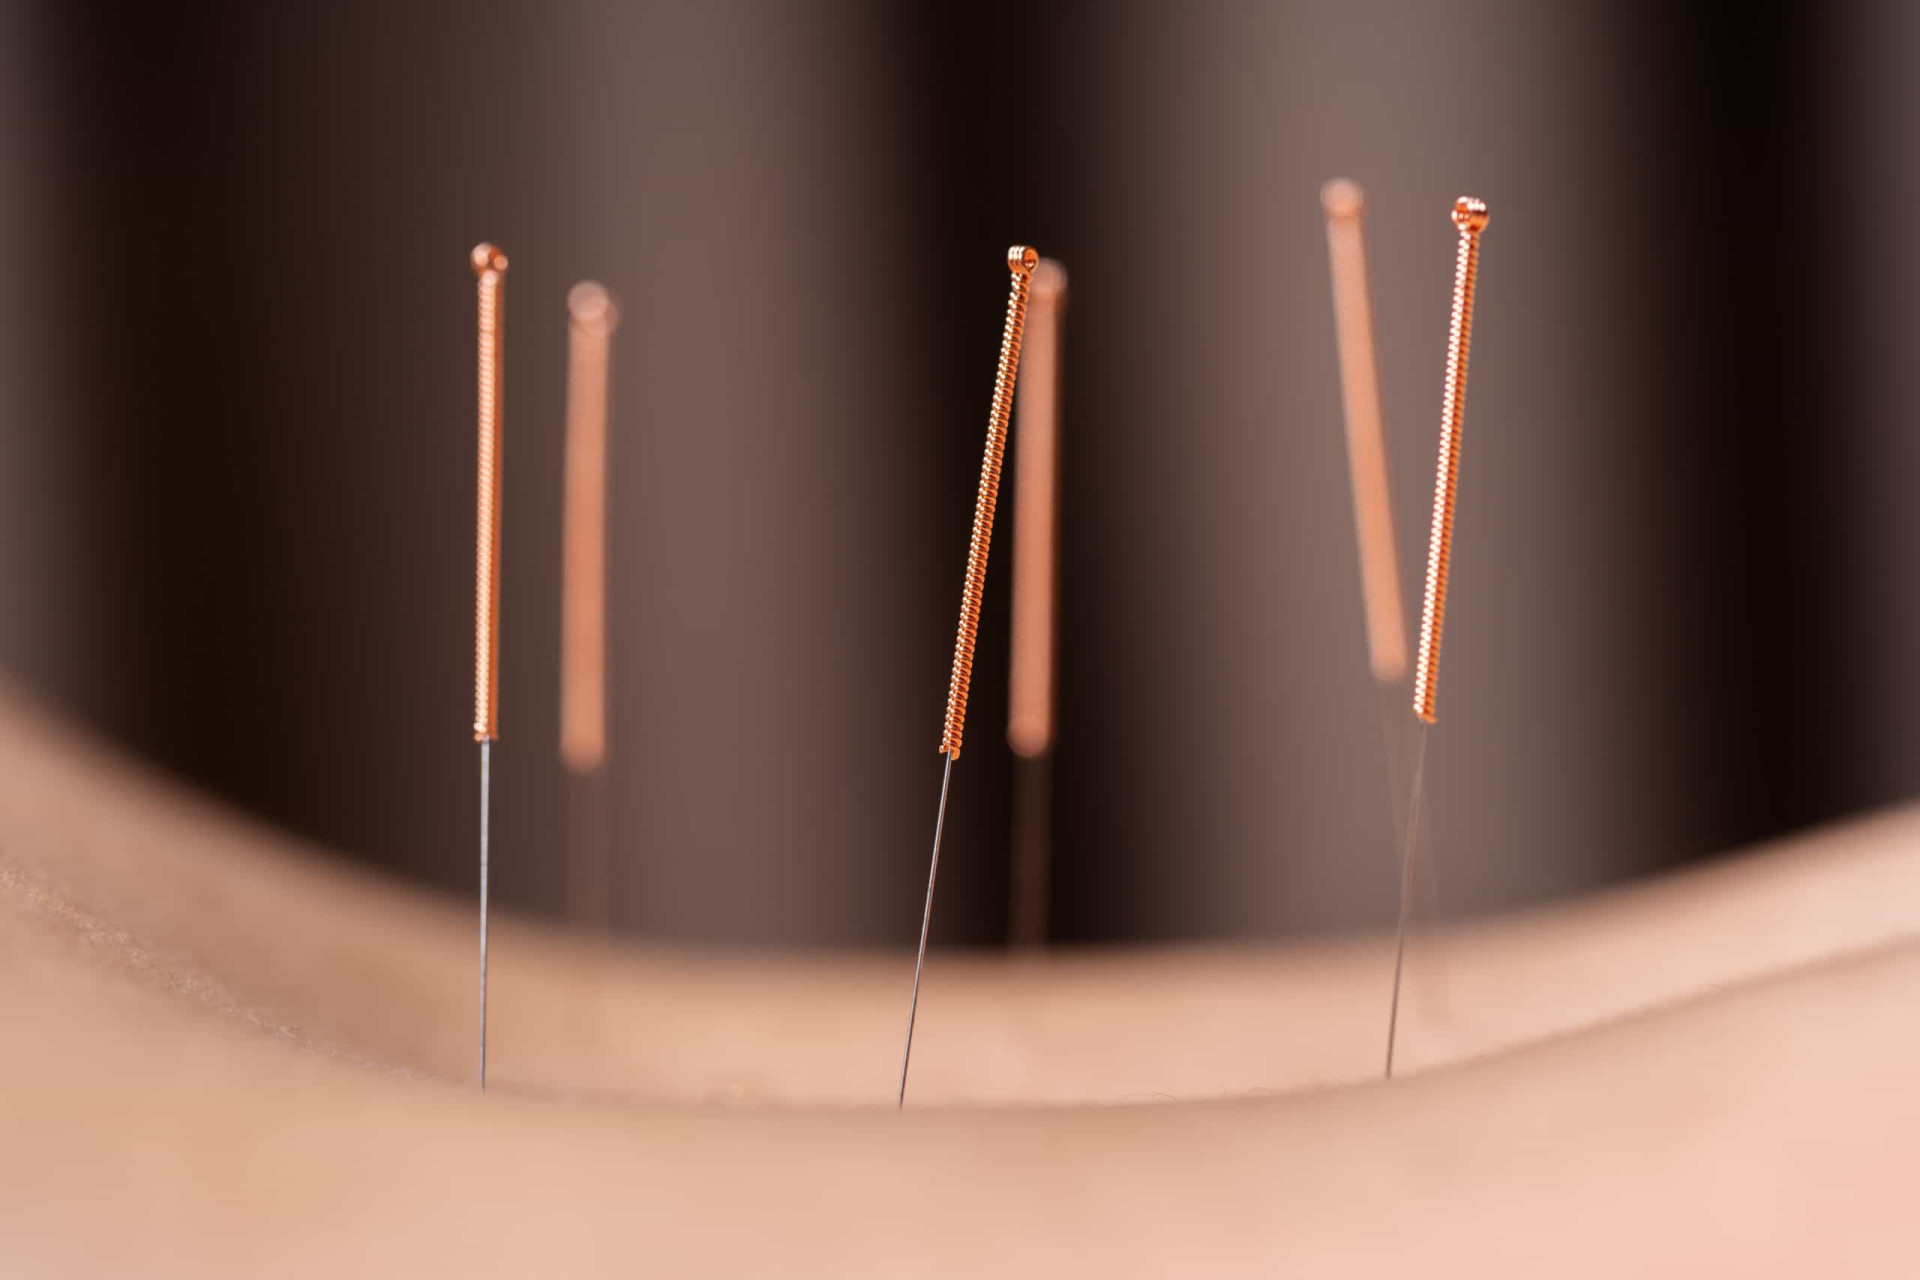 <p>You don't have to be in pain to get an acupuncture treatment. As a preventative medicine, acupuncture strengthens your immune system, promotes healthy circulation, and aids in organ and cell detoxification. It also alleviates pain and inflammation.</p><p>You may also like:<a href="https://www.starsinsider.com/n/456082?utm_source=msn.com&utm_medium=display&utm_campaign=referral_description&utm_content=509810en-us"> The most dangerous documentaries ever made</a></p>